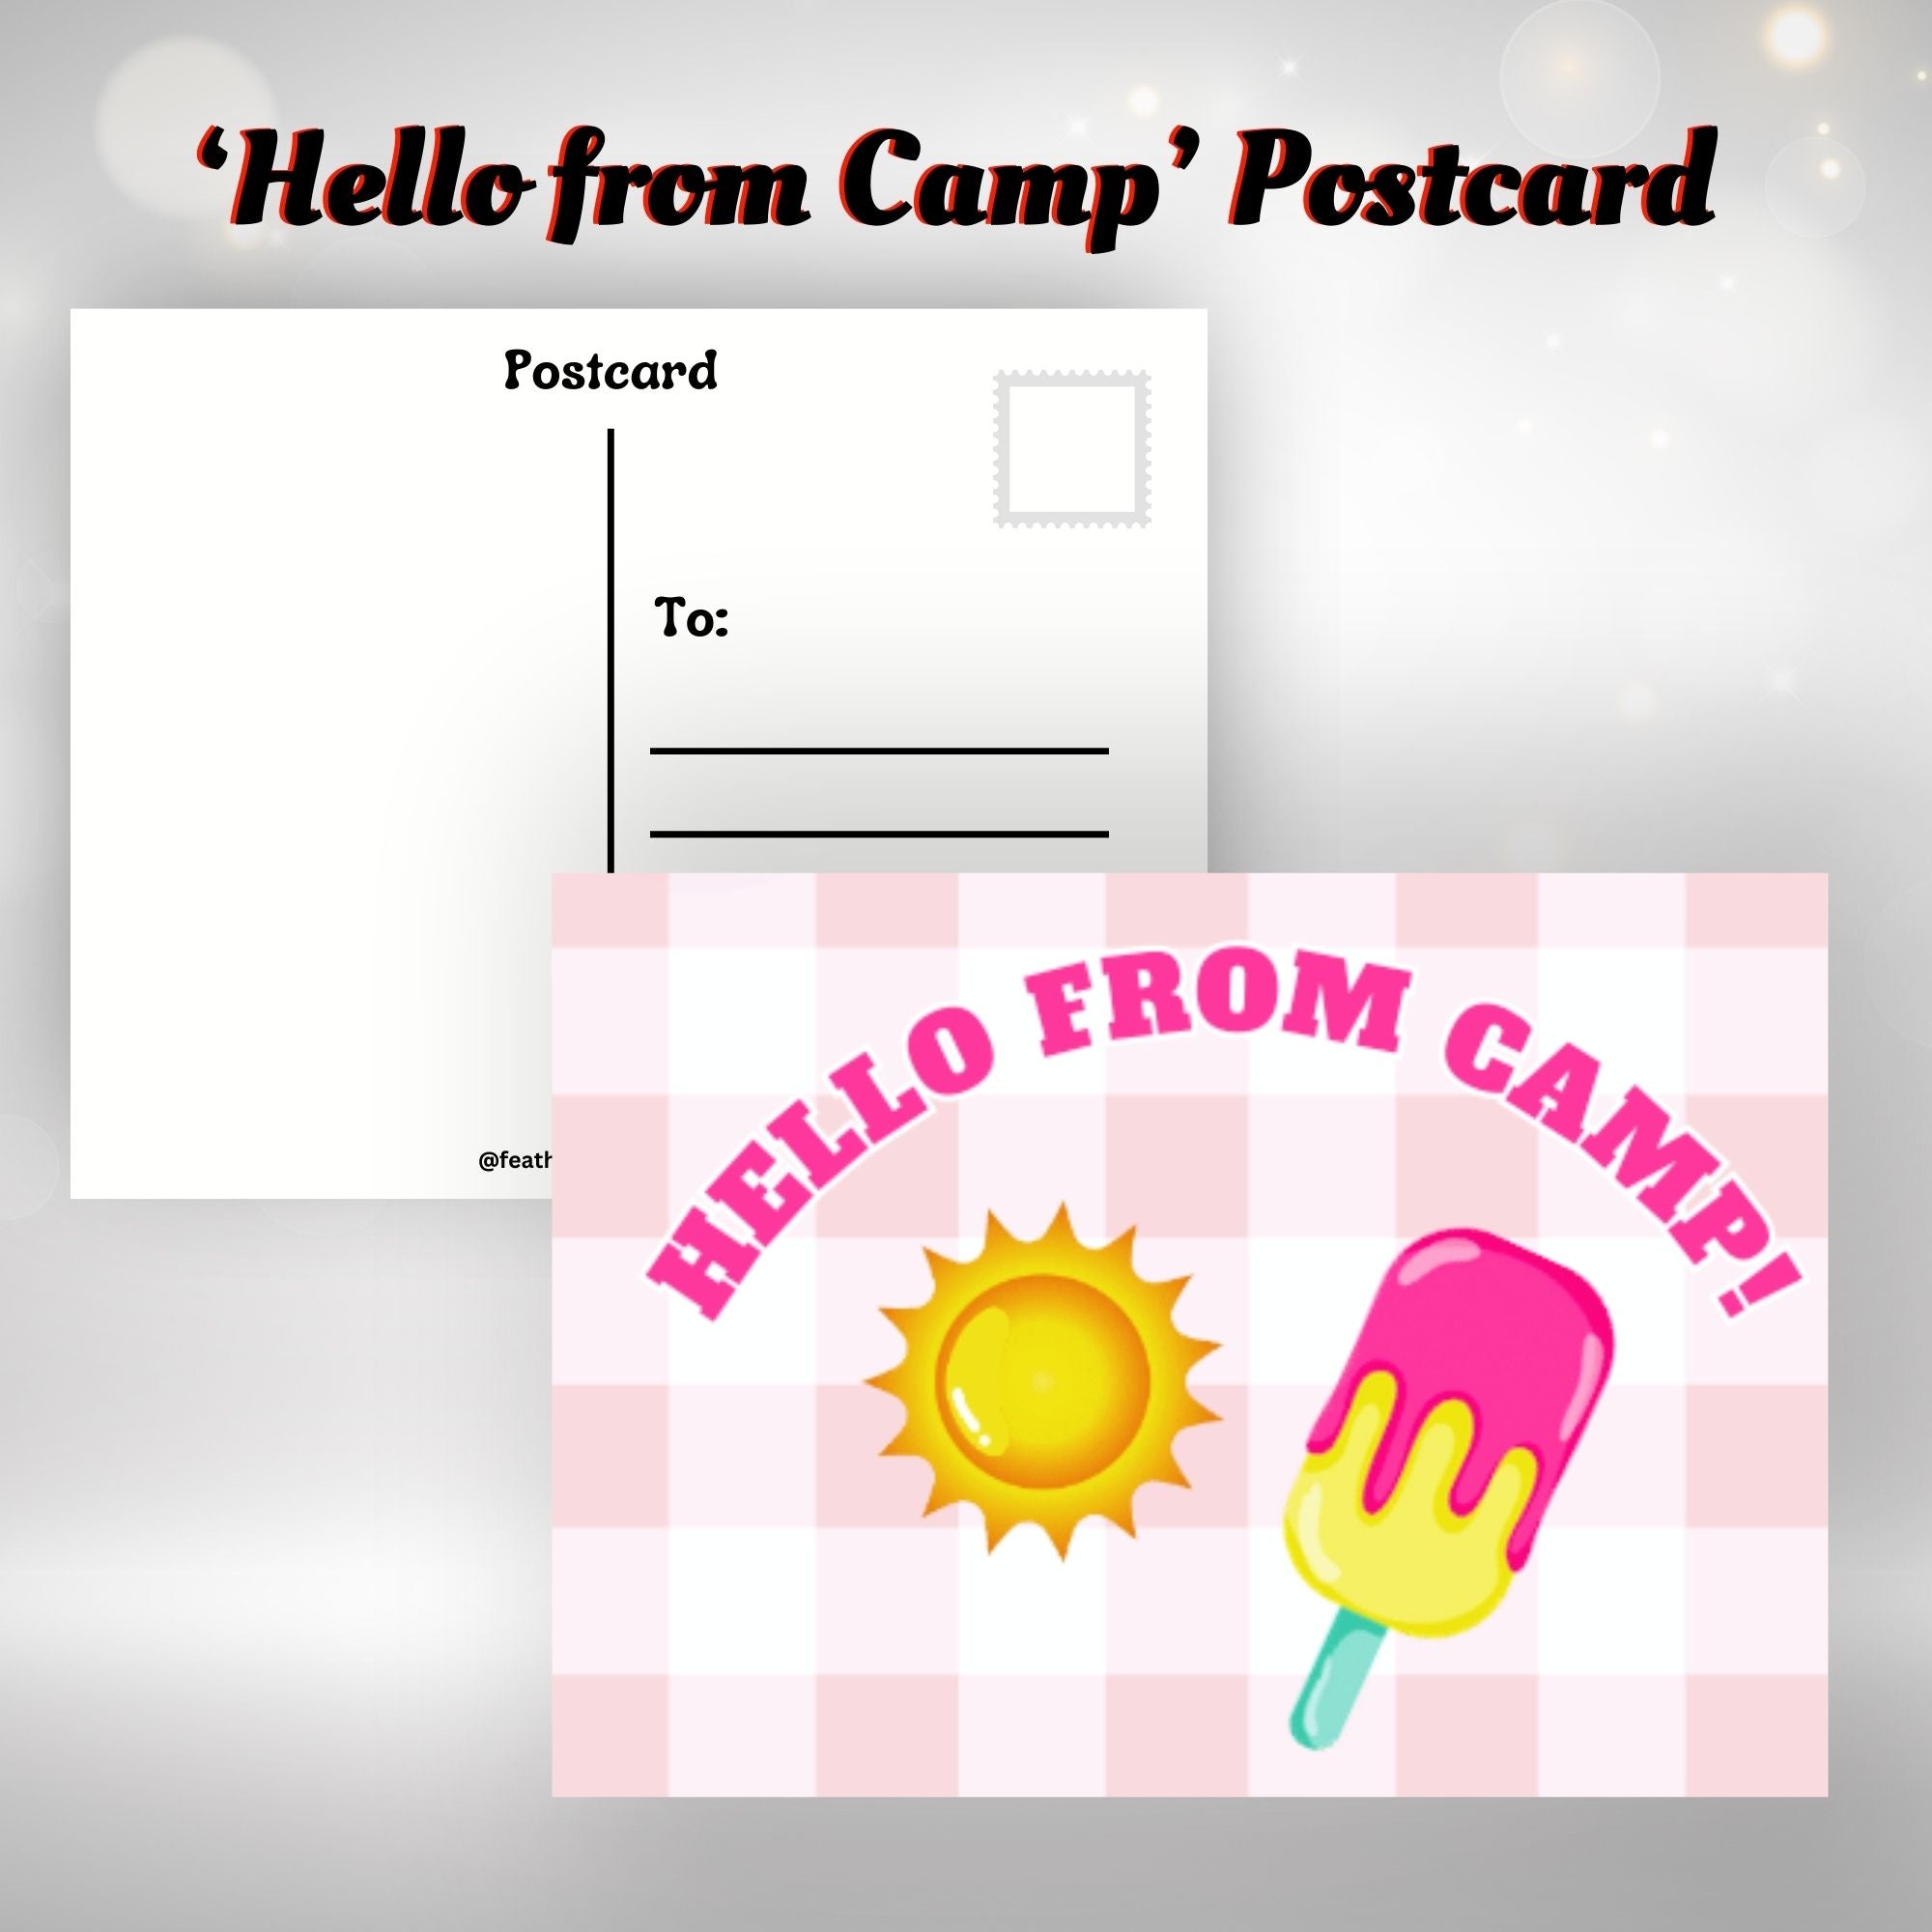 This image shows the Hello from Camp! postcard with the sun and an ice cream bar.